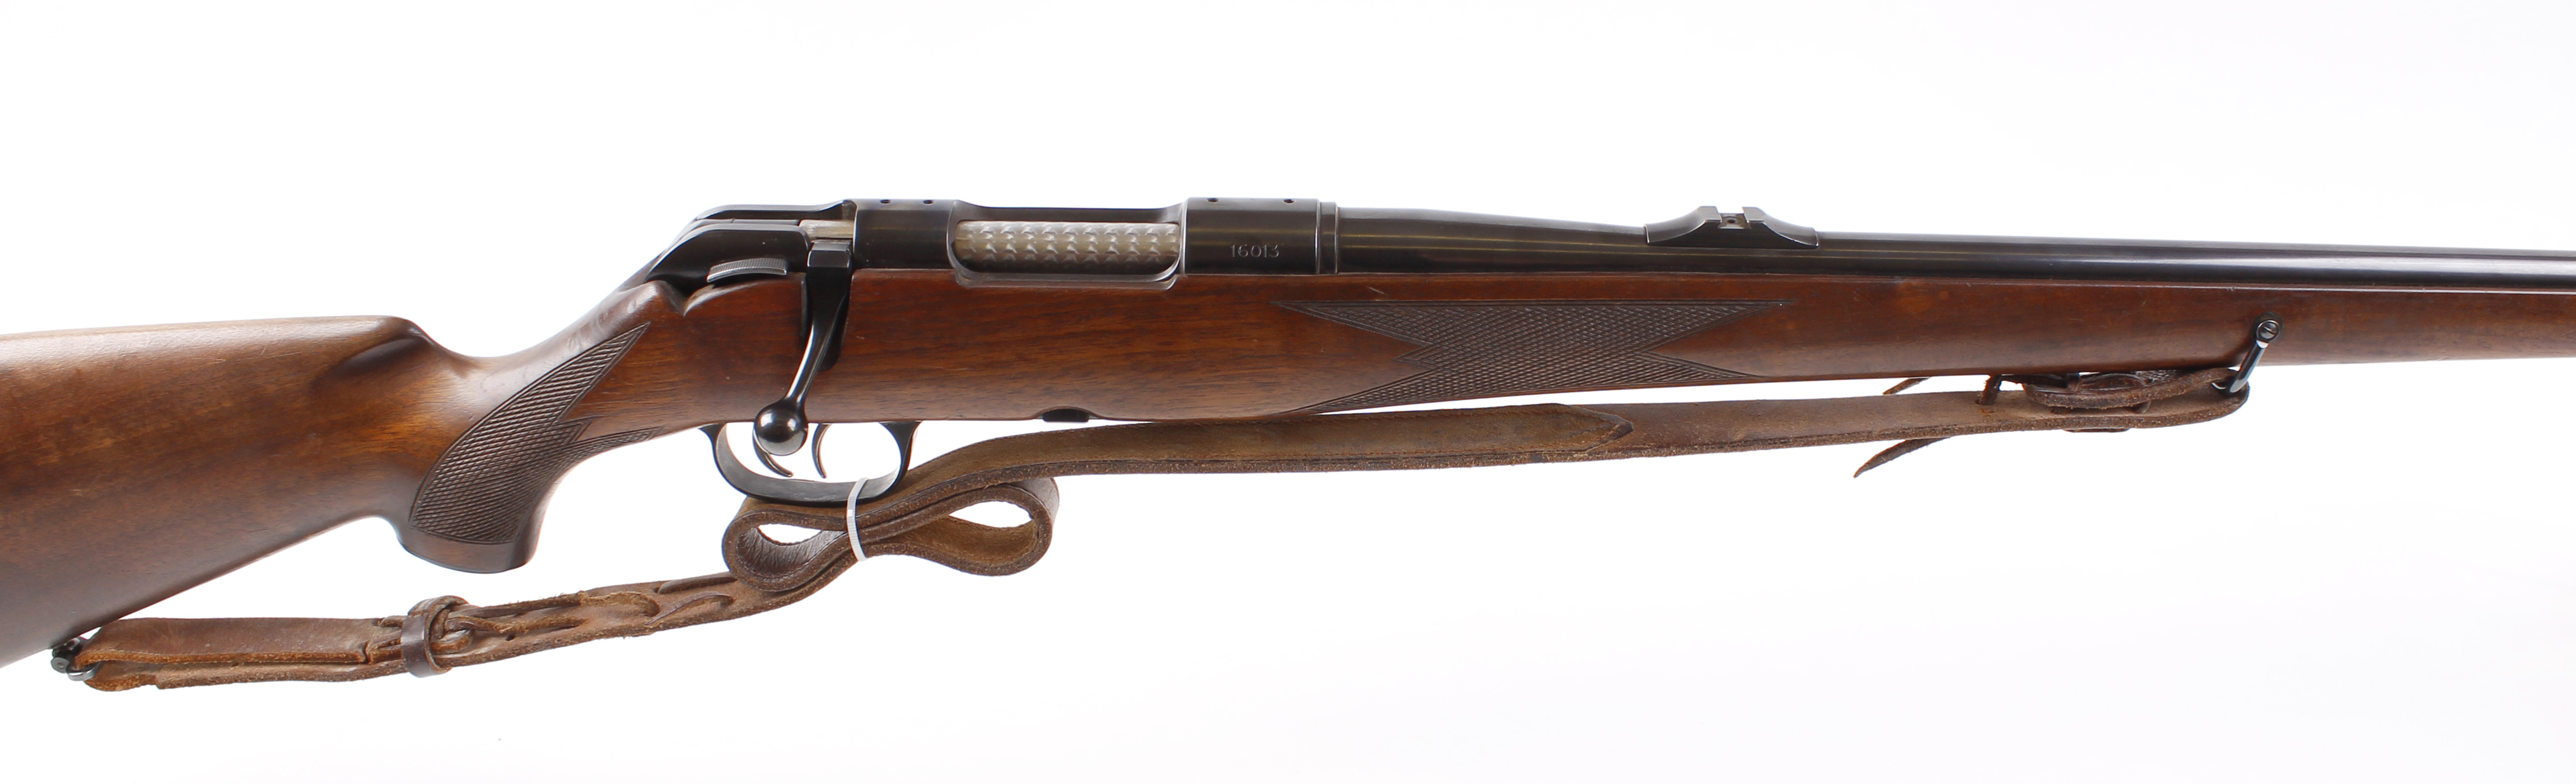 S1 .308 (win) Krico bolt action sporting rifle (no magazine), 22½ ins barrel (sights removed),